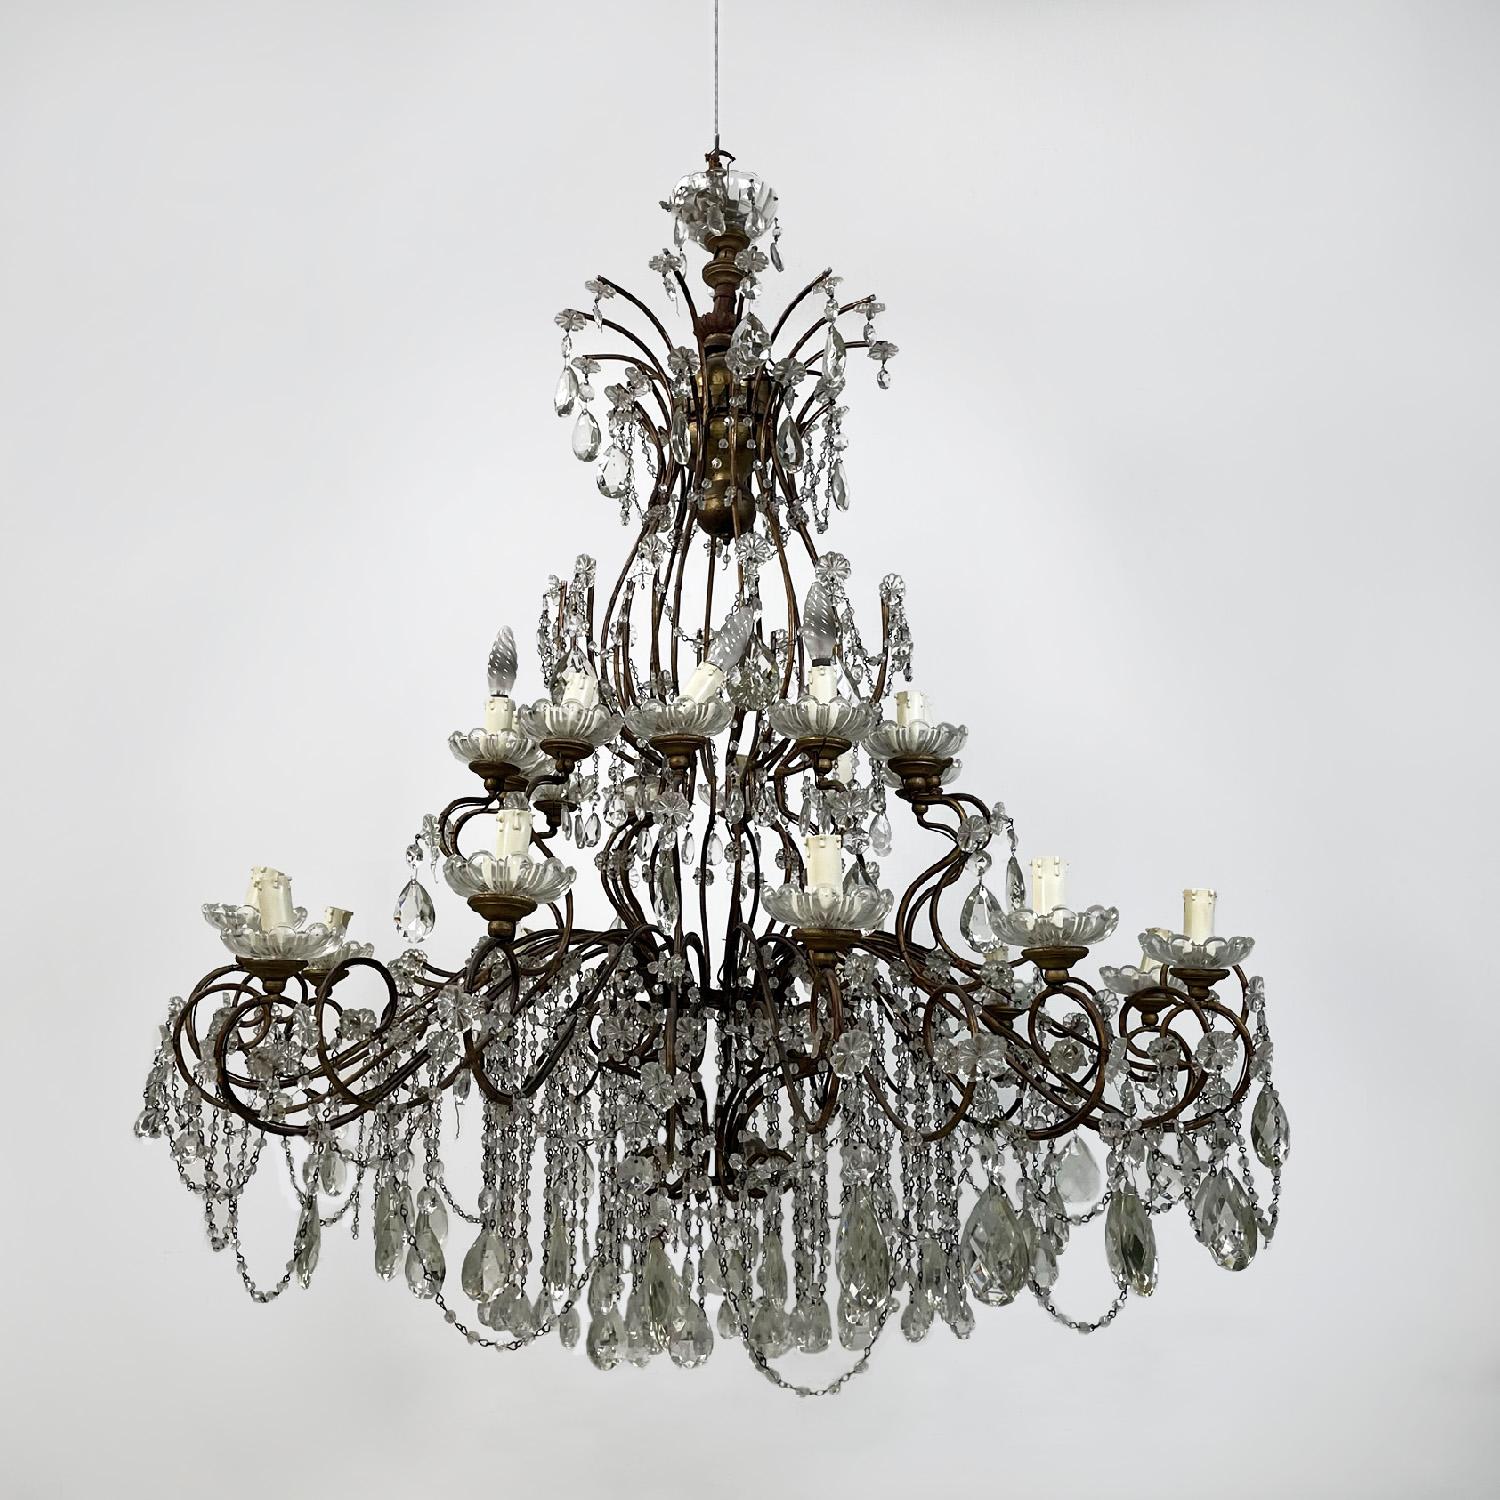 Italian antique crystal drops golden wrought iron and wood chandelier, 1900s
Large chandelier with round structure in gilded wrought iron, wood and crystal drops. It has two rows of arms: the lower one is made up of 24 arms that extend to become the